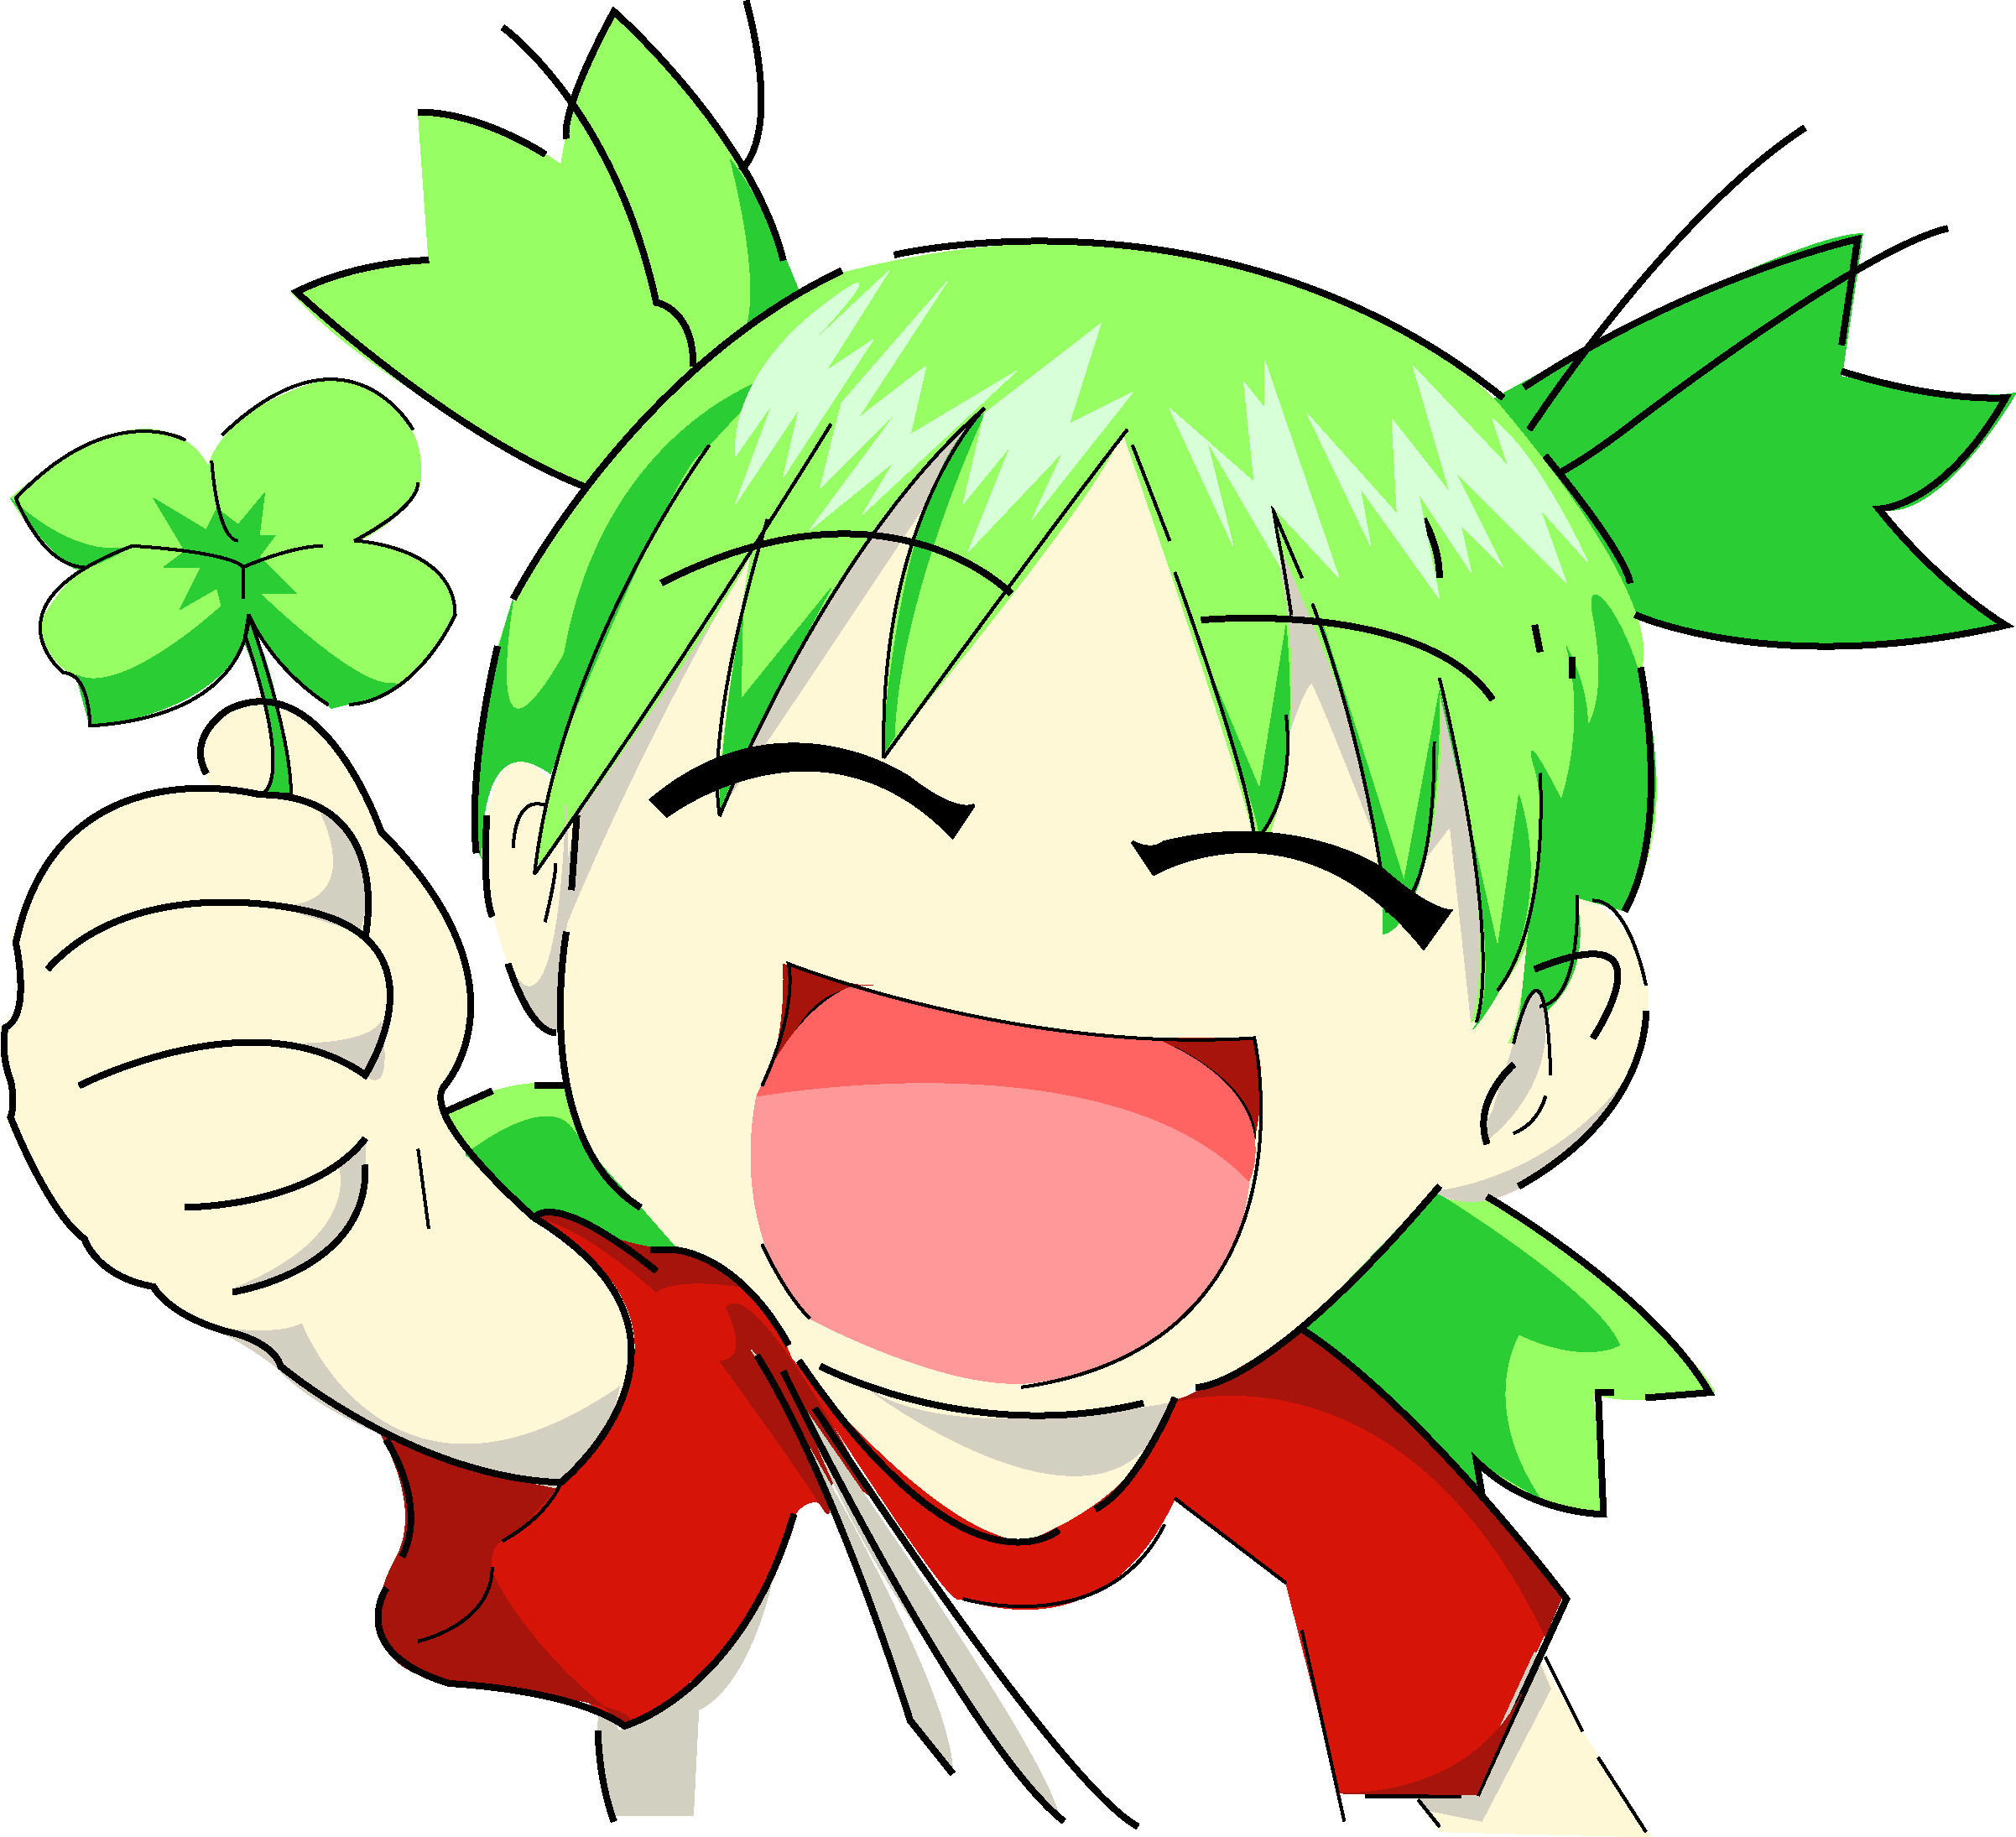 A picture of Yotsuba smiling while holding a four-leaf clover.